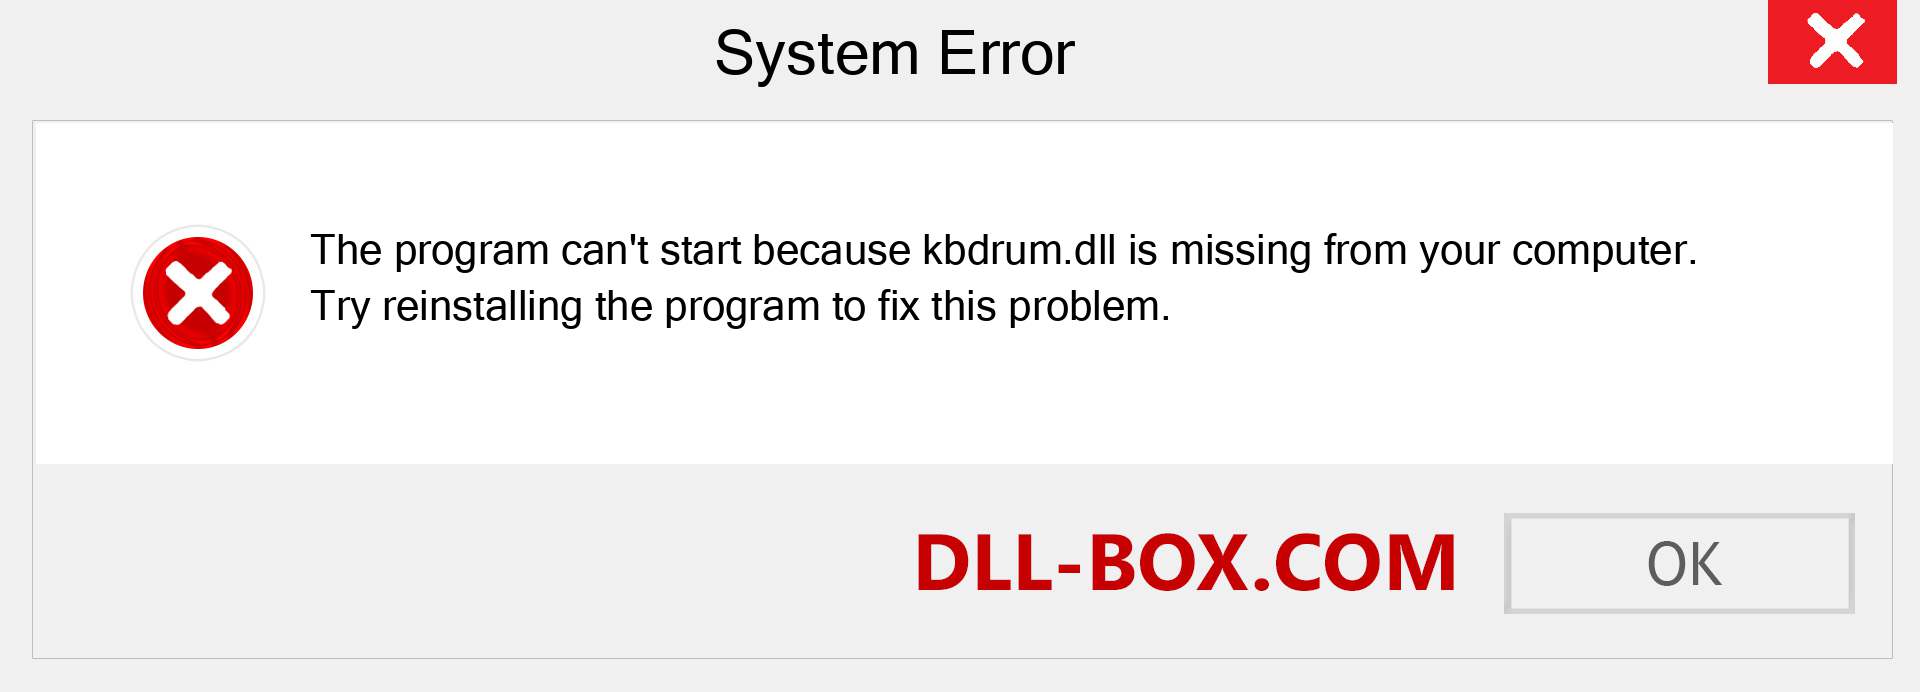  kbdrum.dll file is missing?. Download for Windows 7, 8, 10 - Fix  kbdrum dll Missing Error on Windows, photos, images